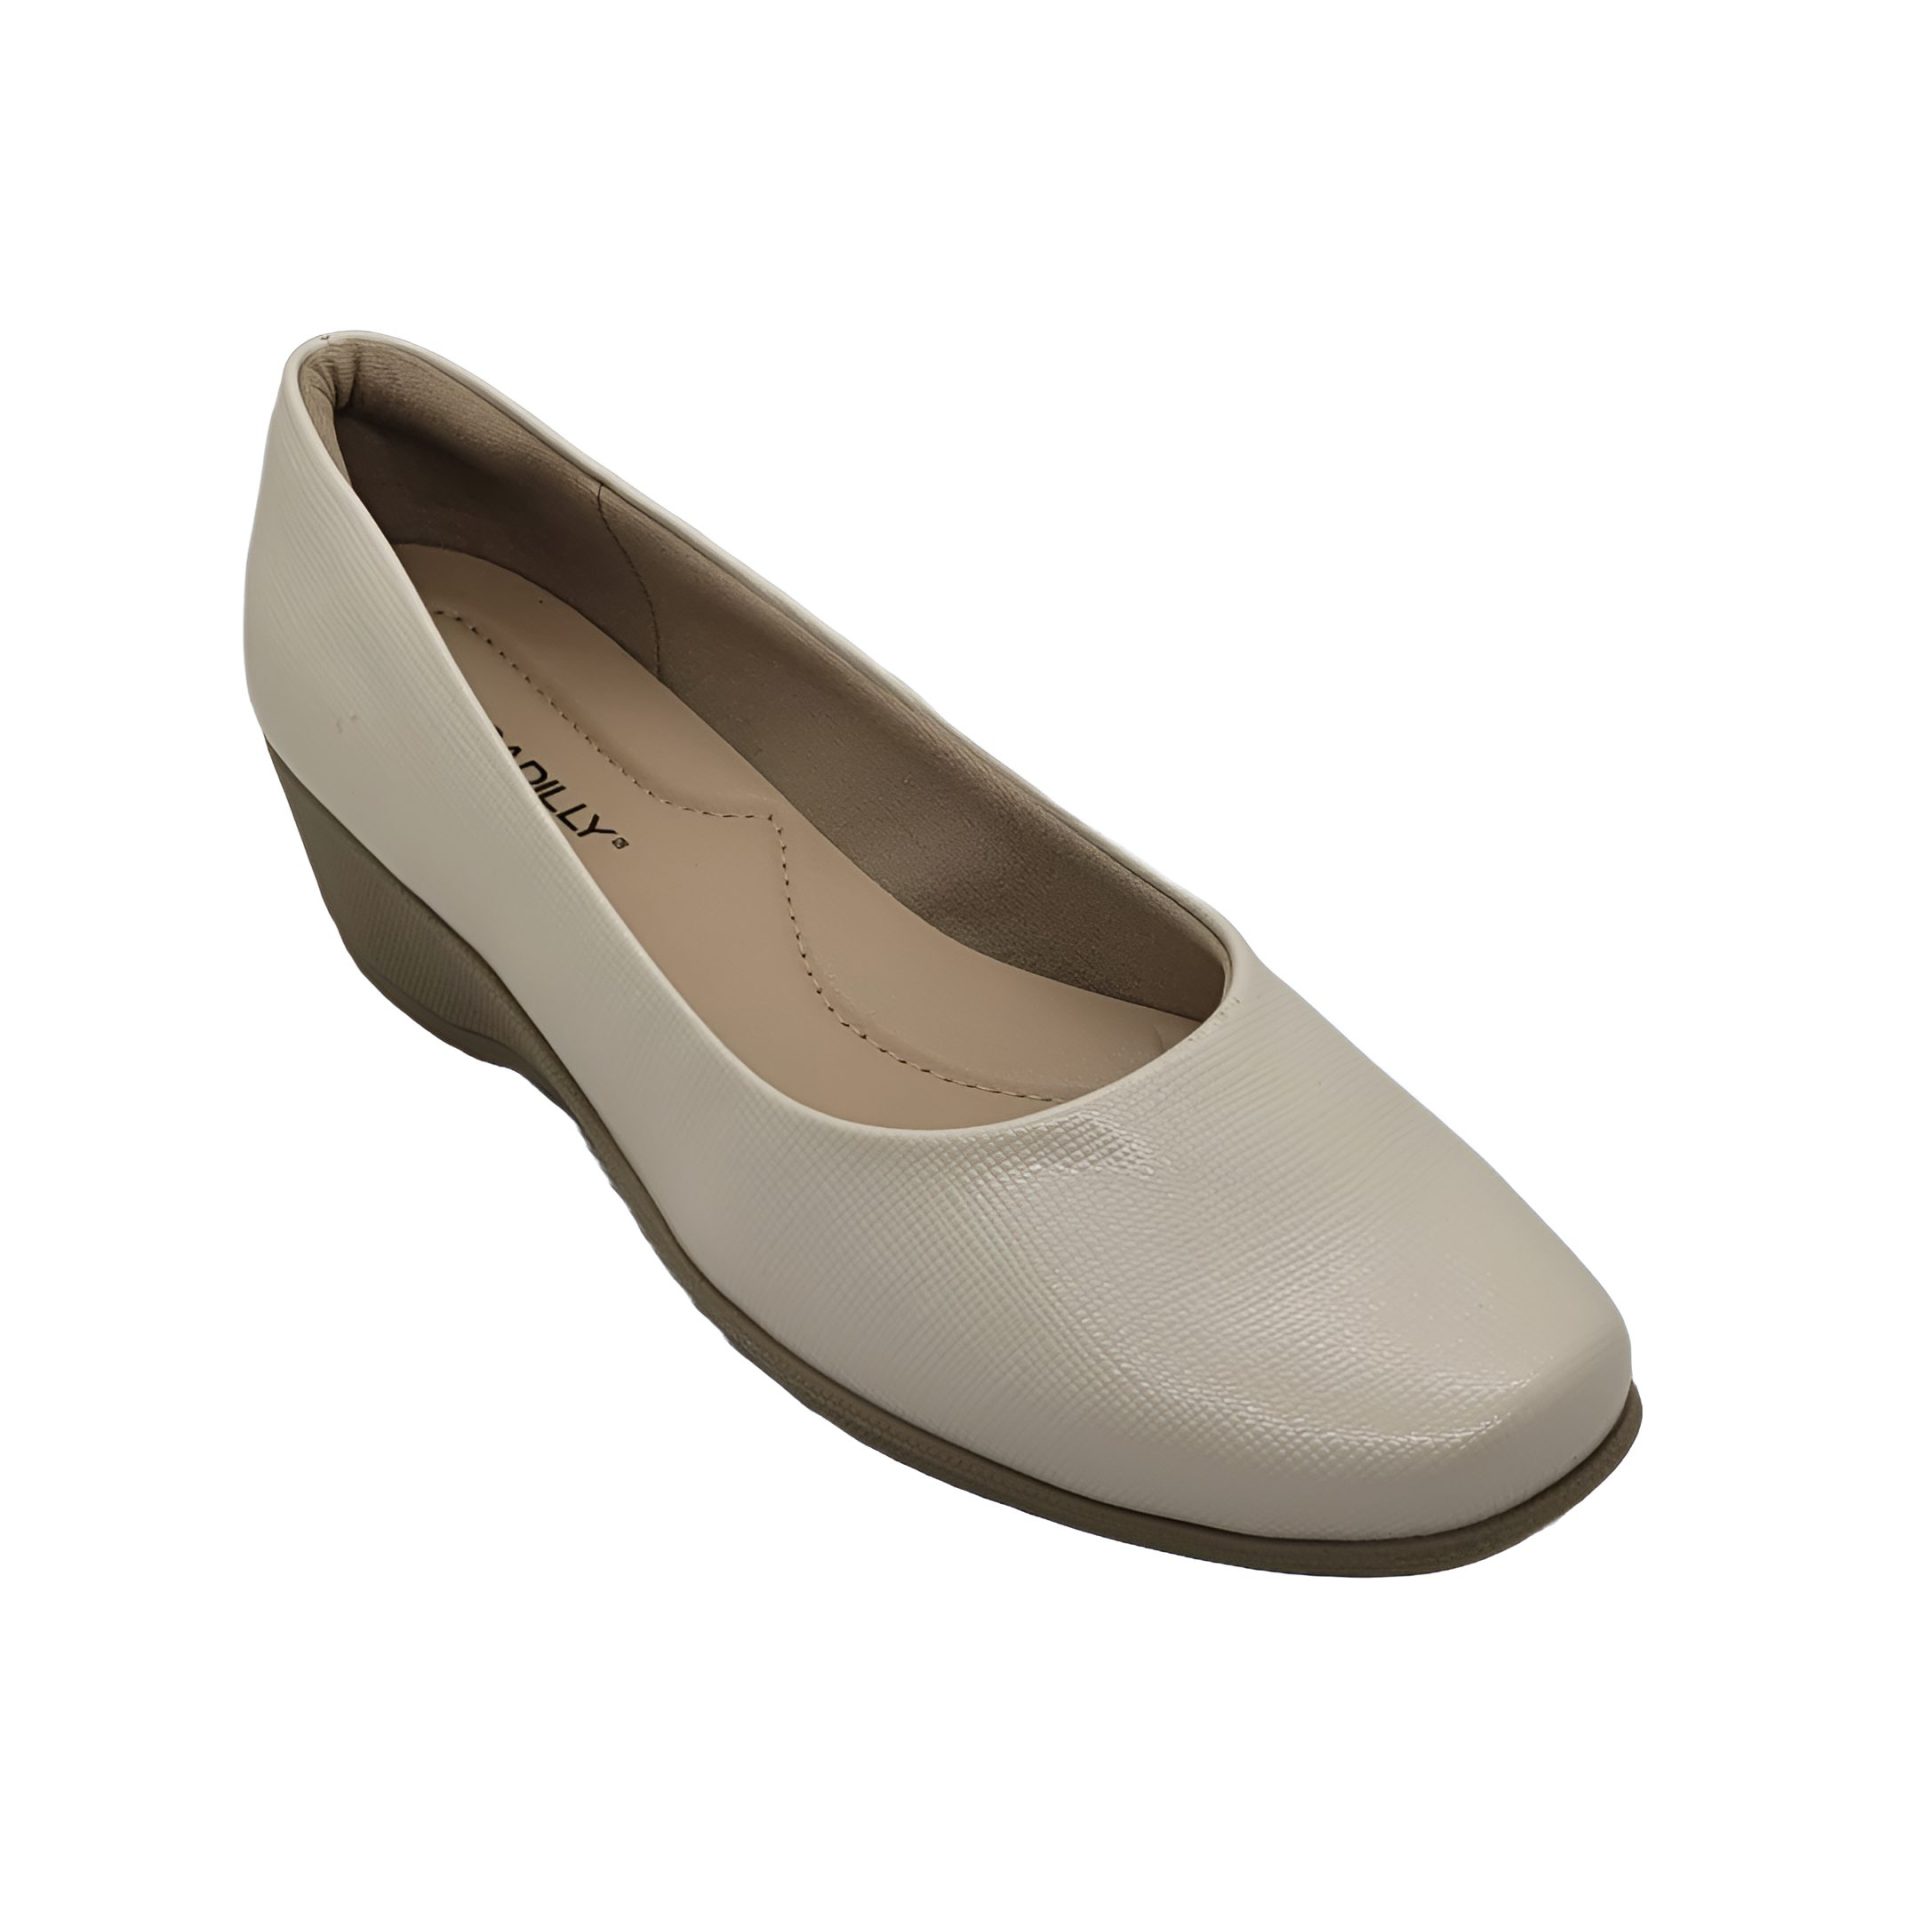 ZAPATOS PICCADILLY NUDE PI-14313300000282